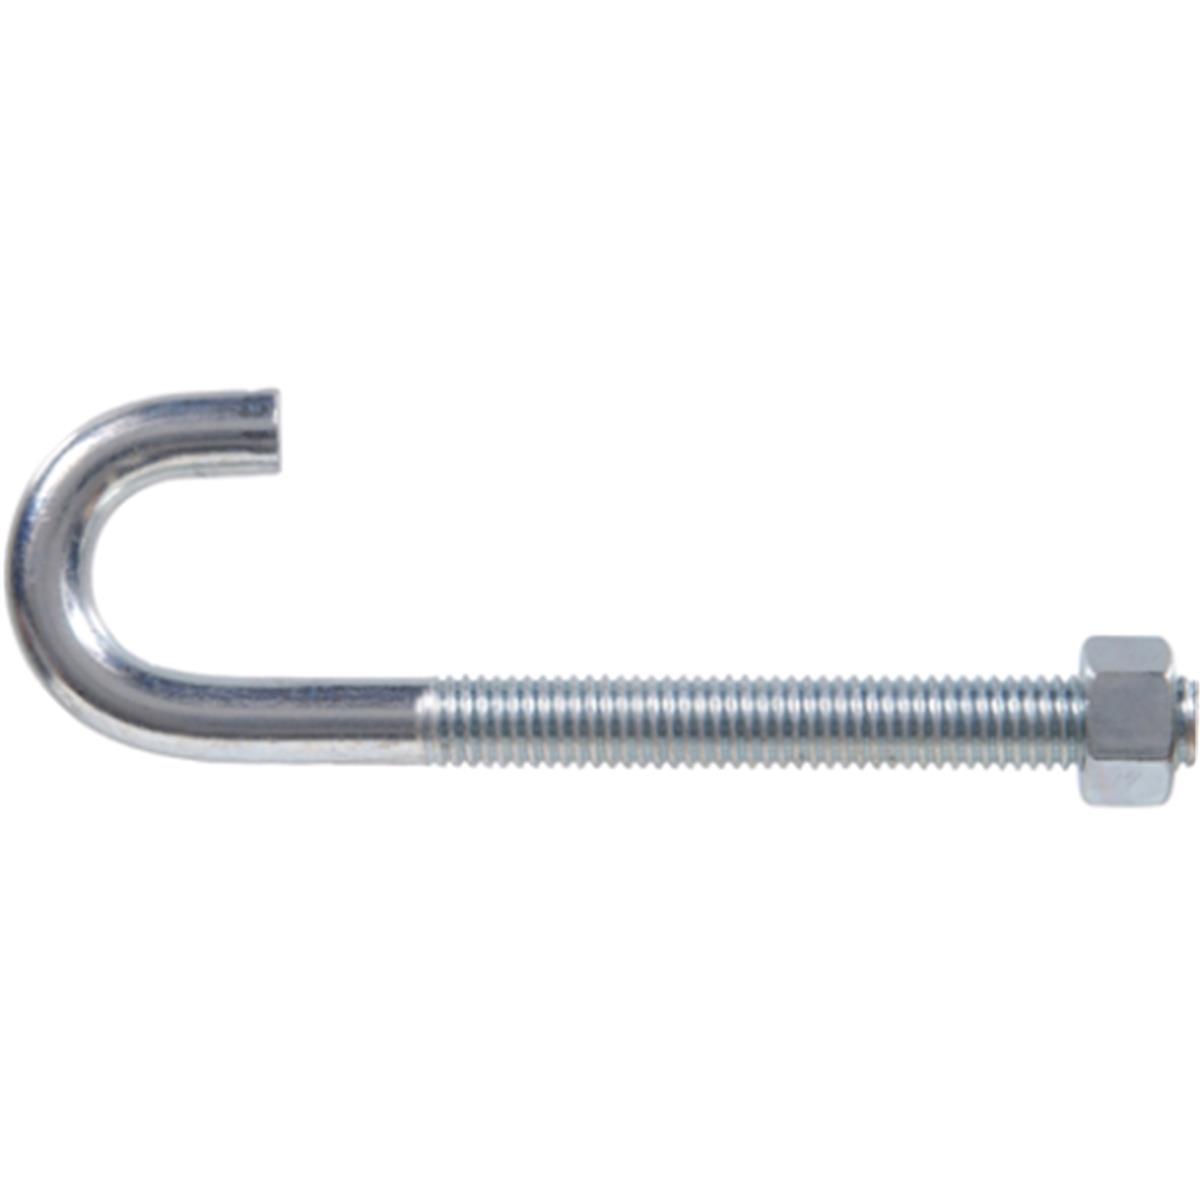 0.37-16 X 5 In. Zinc Plated J-bolt With Nut, Pack Of 10